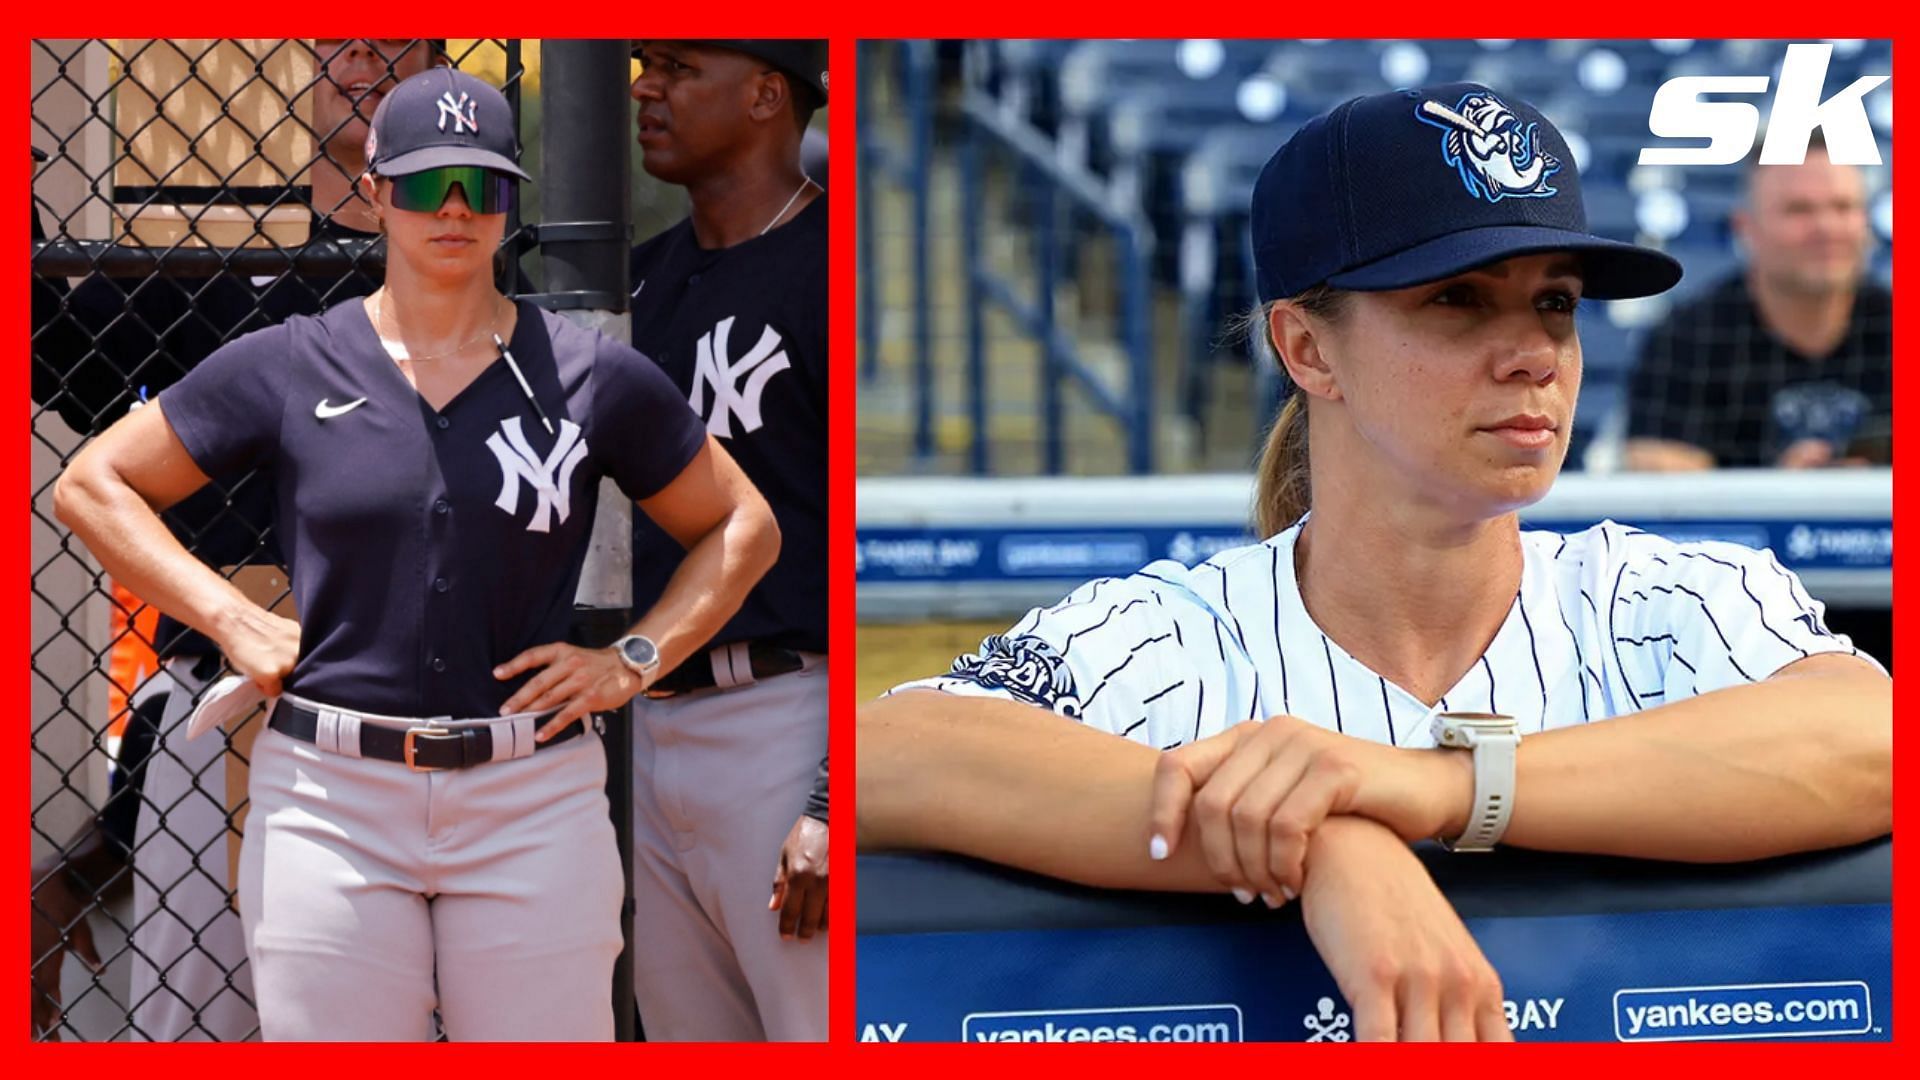 Rachel Balkovec to become first woman to manage a minor league team